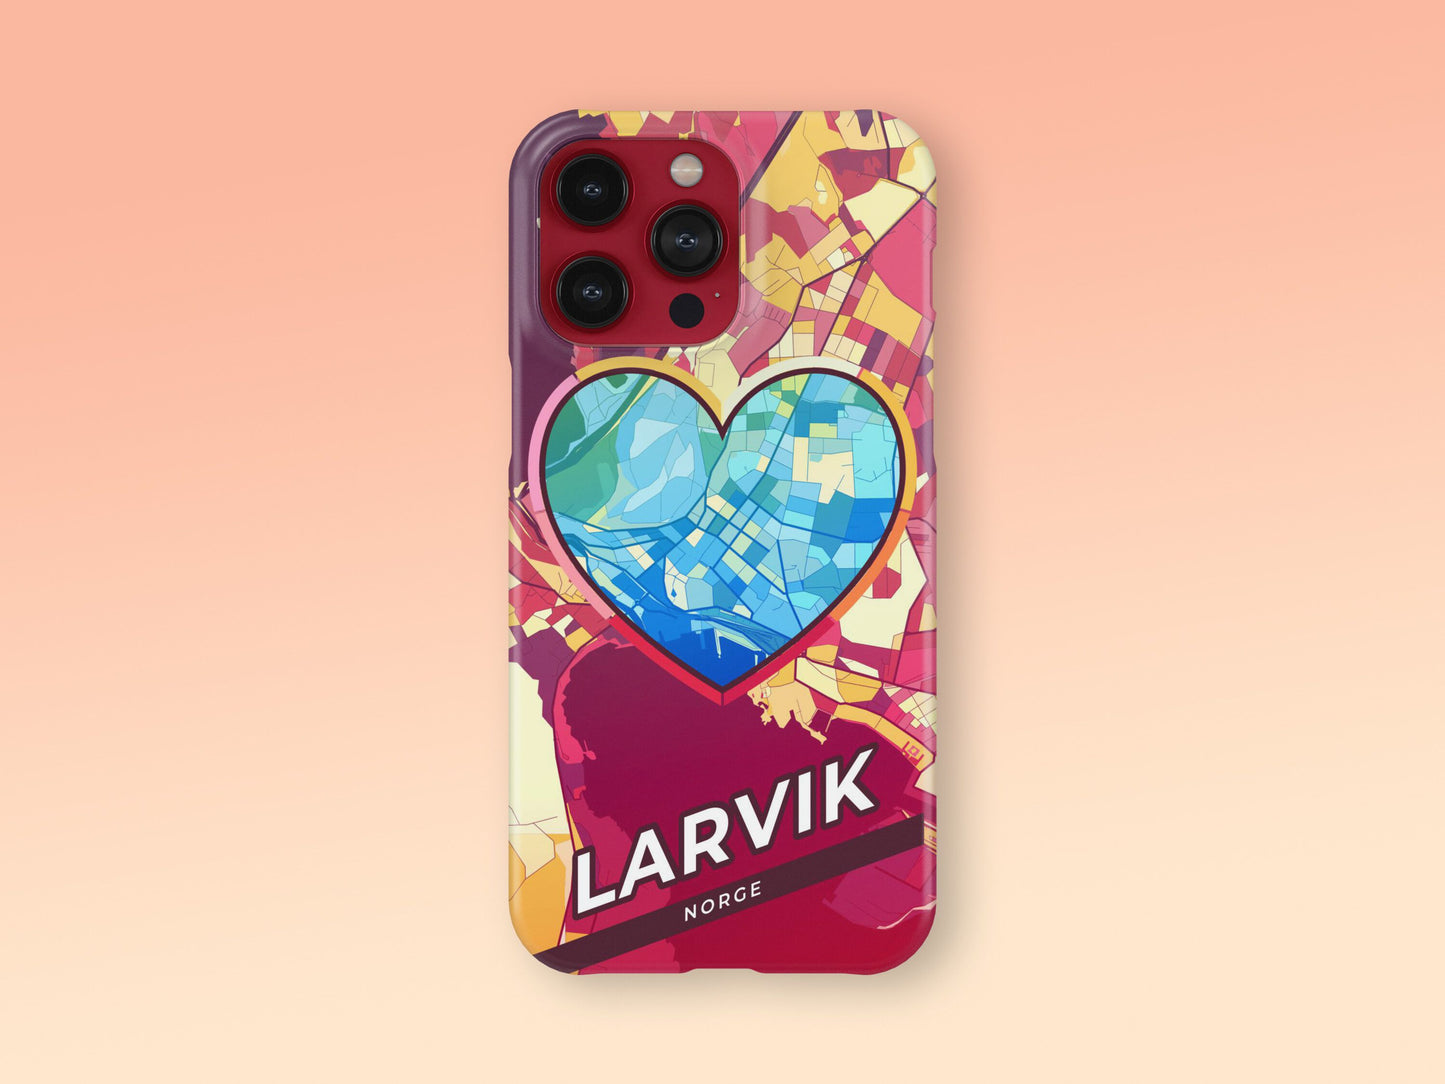 Larvik Norway slim phone case with colorful icon. Birthday, wedding or housewarming gift. Couple match cases. 2